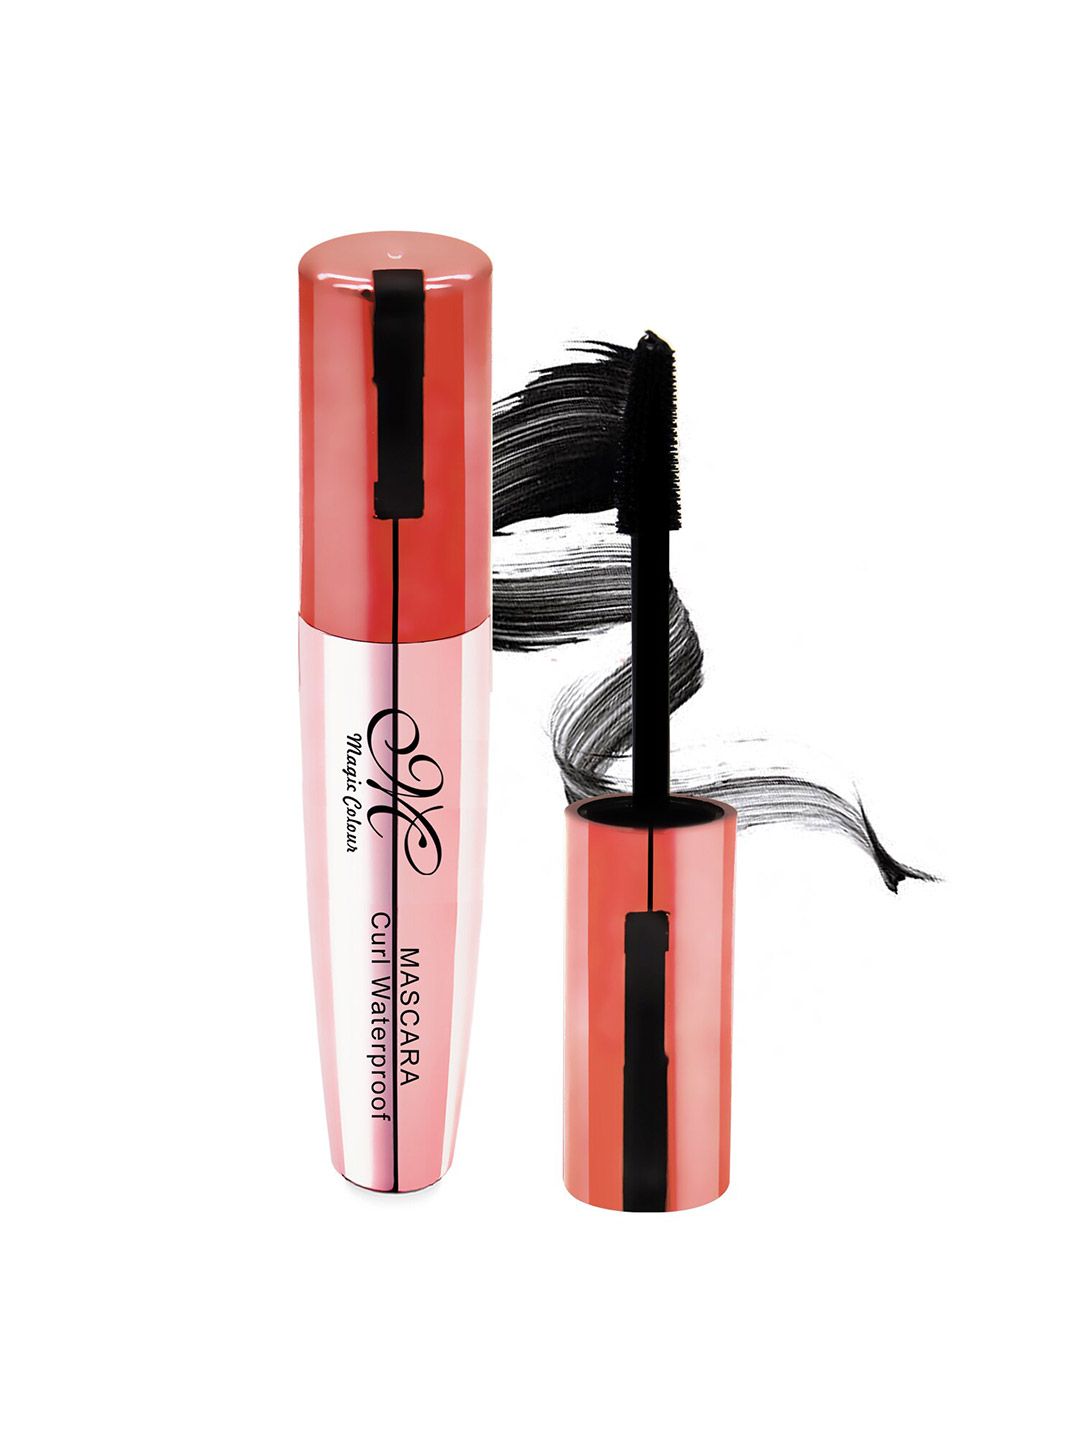 Magic Colour Curl Waterproof Max Mascara with Hyper Adjustable Brush - Jet Black Price in India